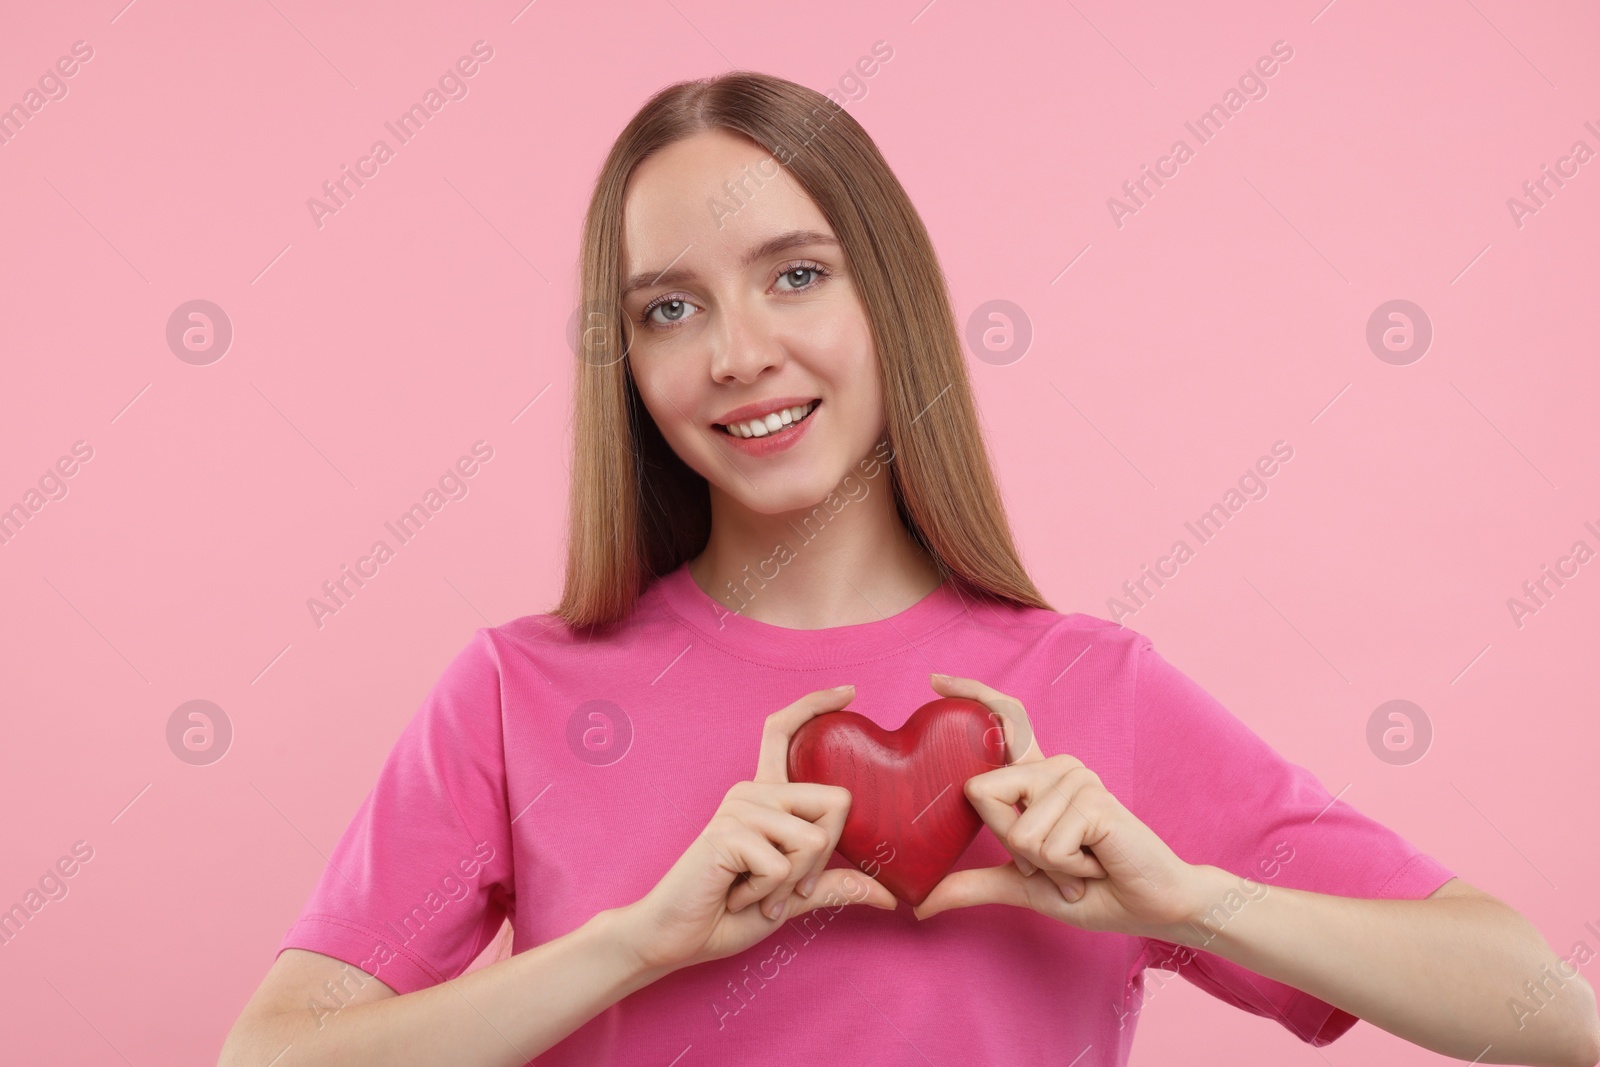 Photo of Happy young woman holding red heart on pink background